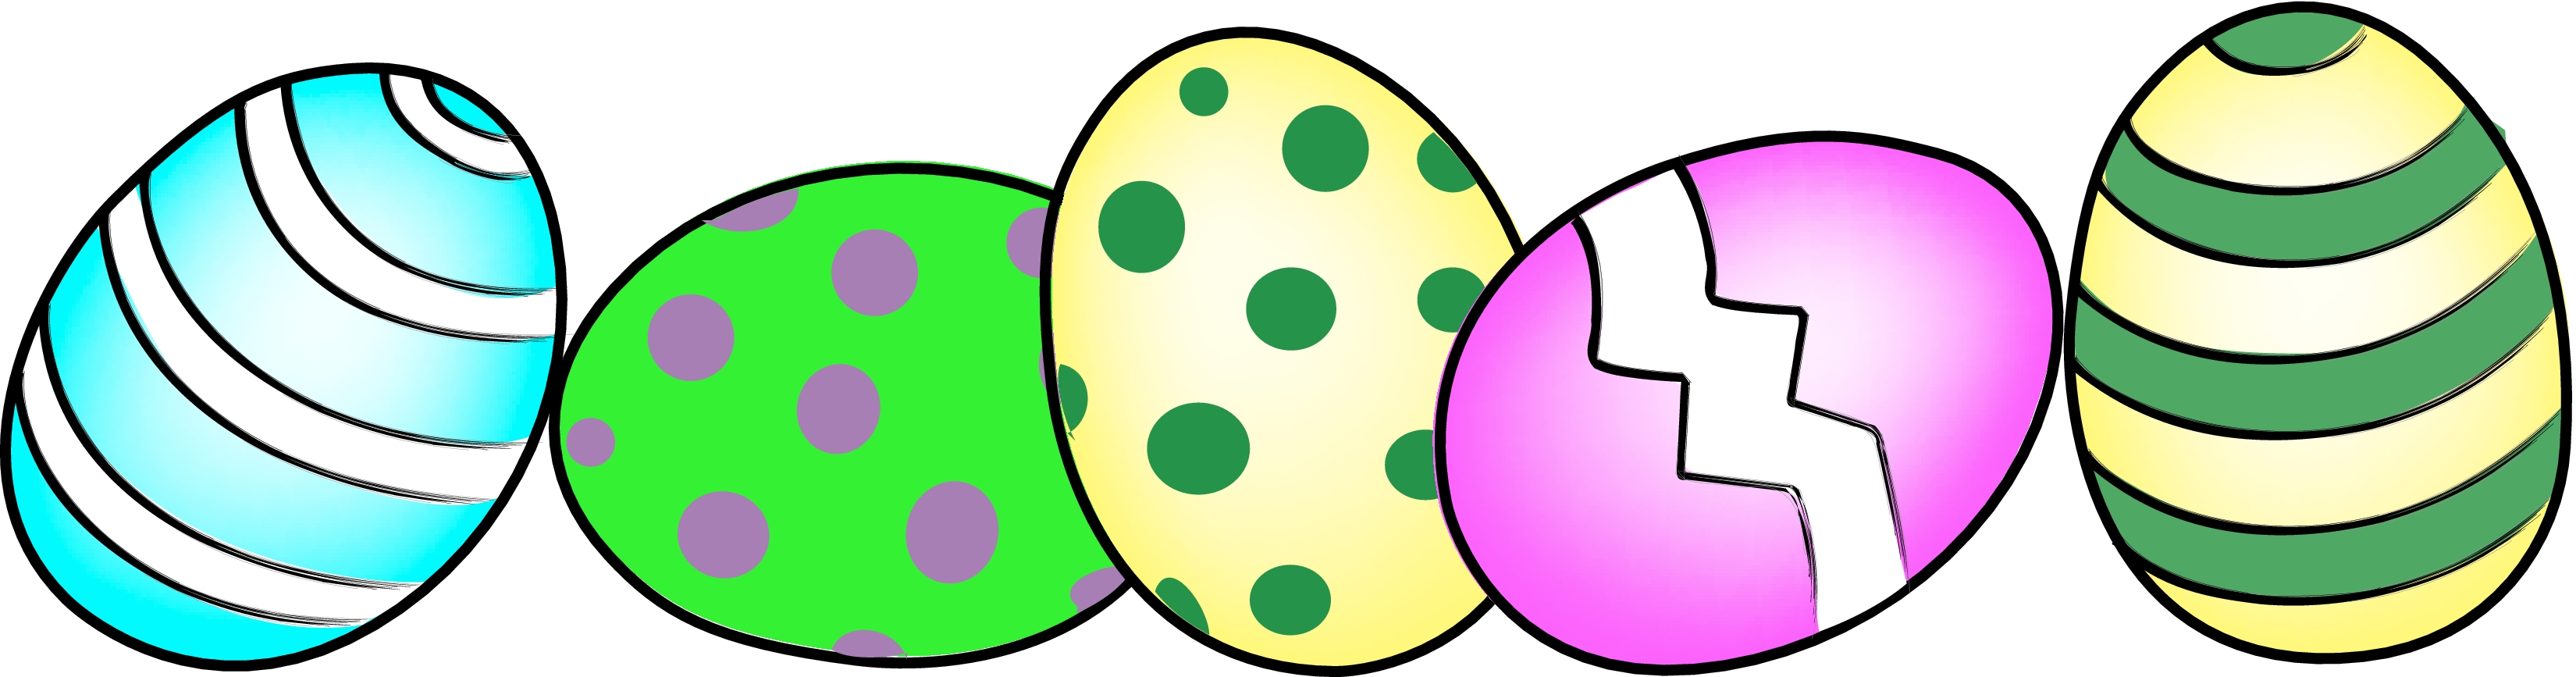 2018 clipart easter. Egg for facebook happy